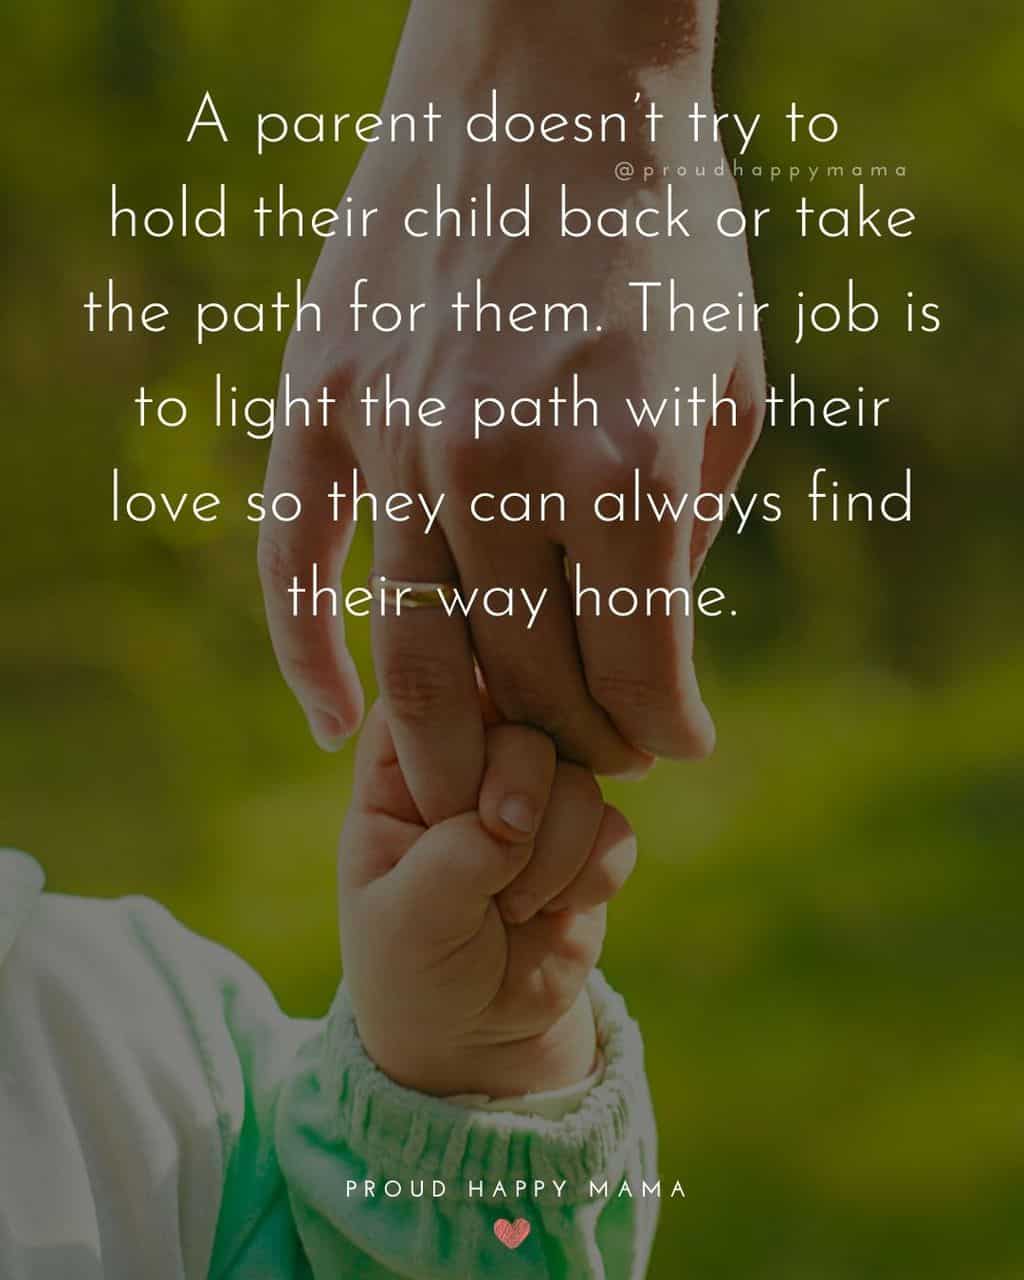 Parenting Quotes - A parent doesn’t try to hold their child back or take the path for them. Their job is to light the path with their love so